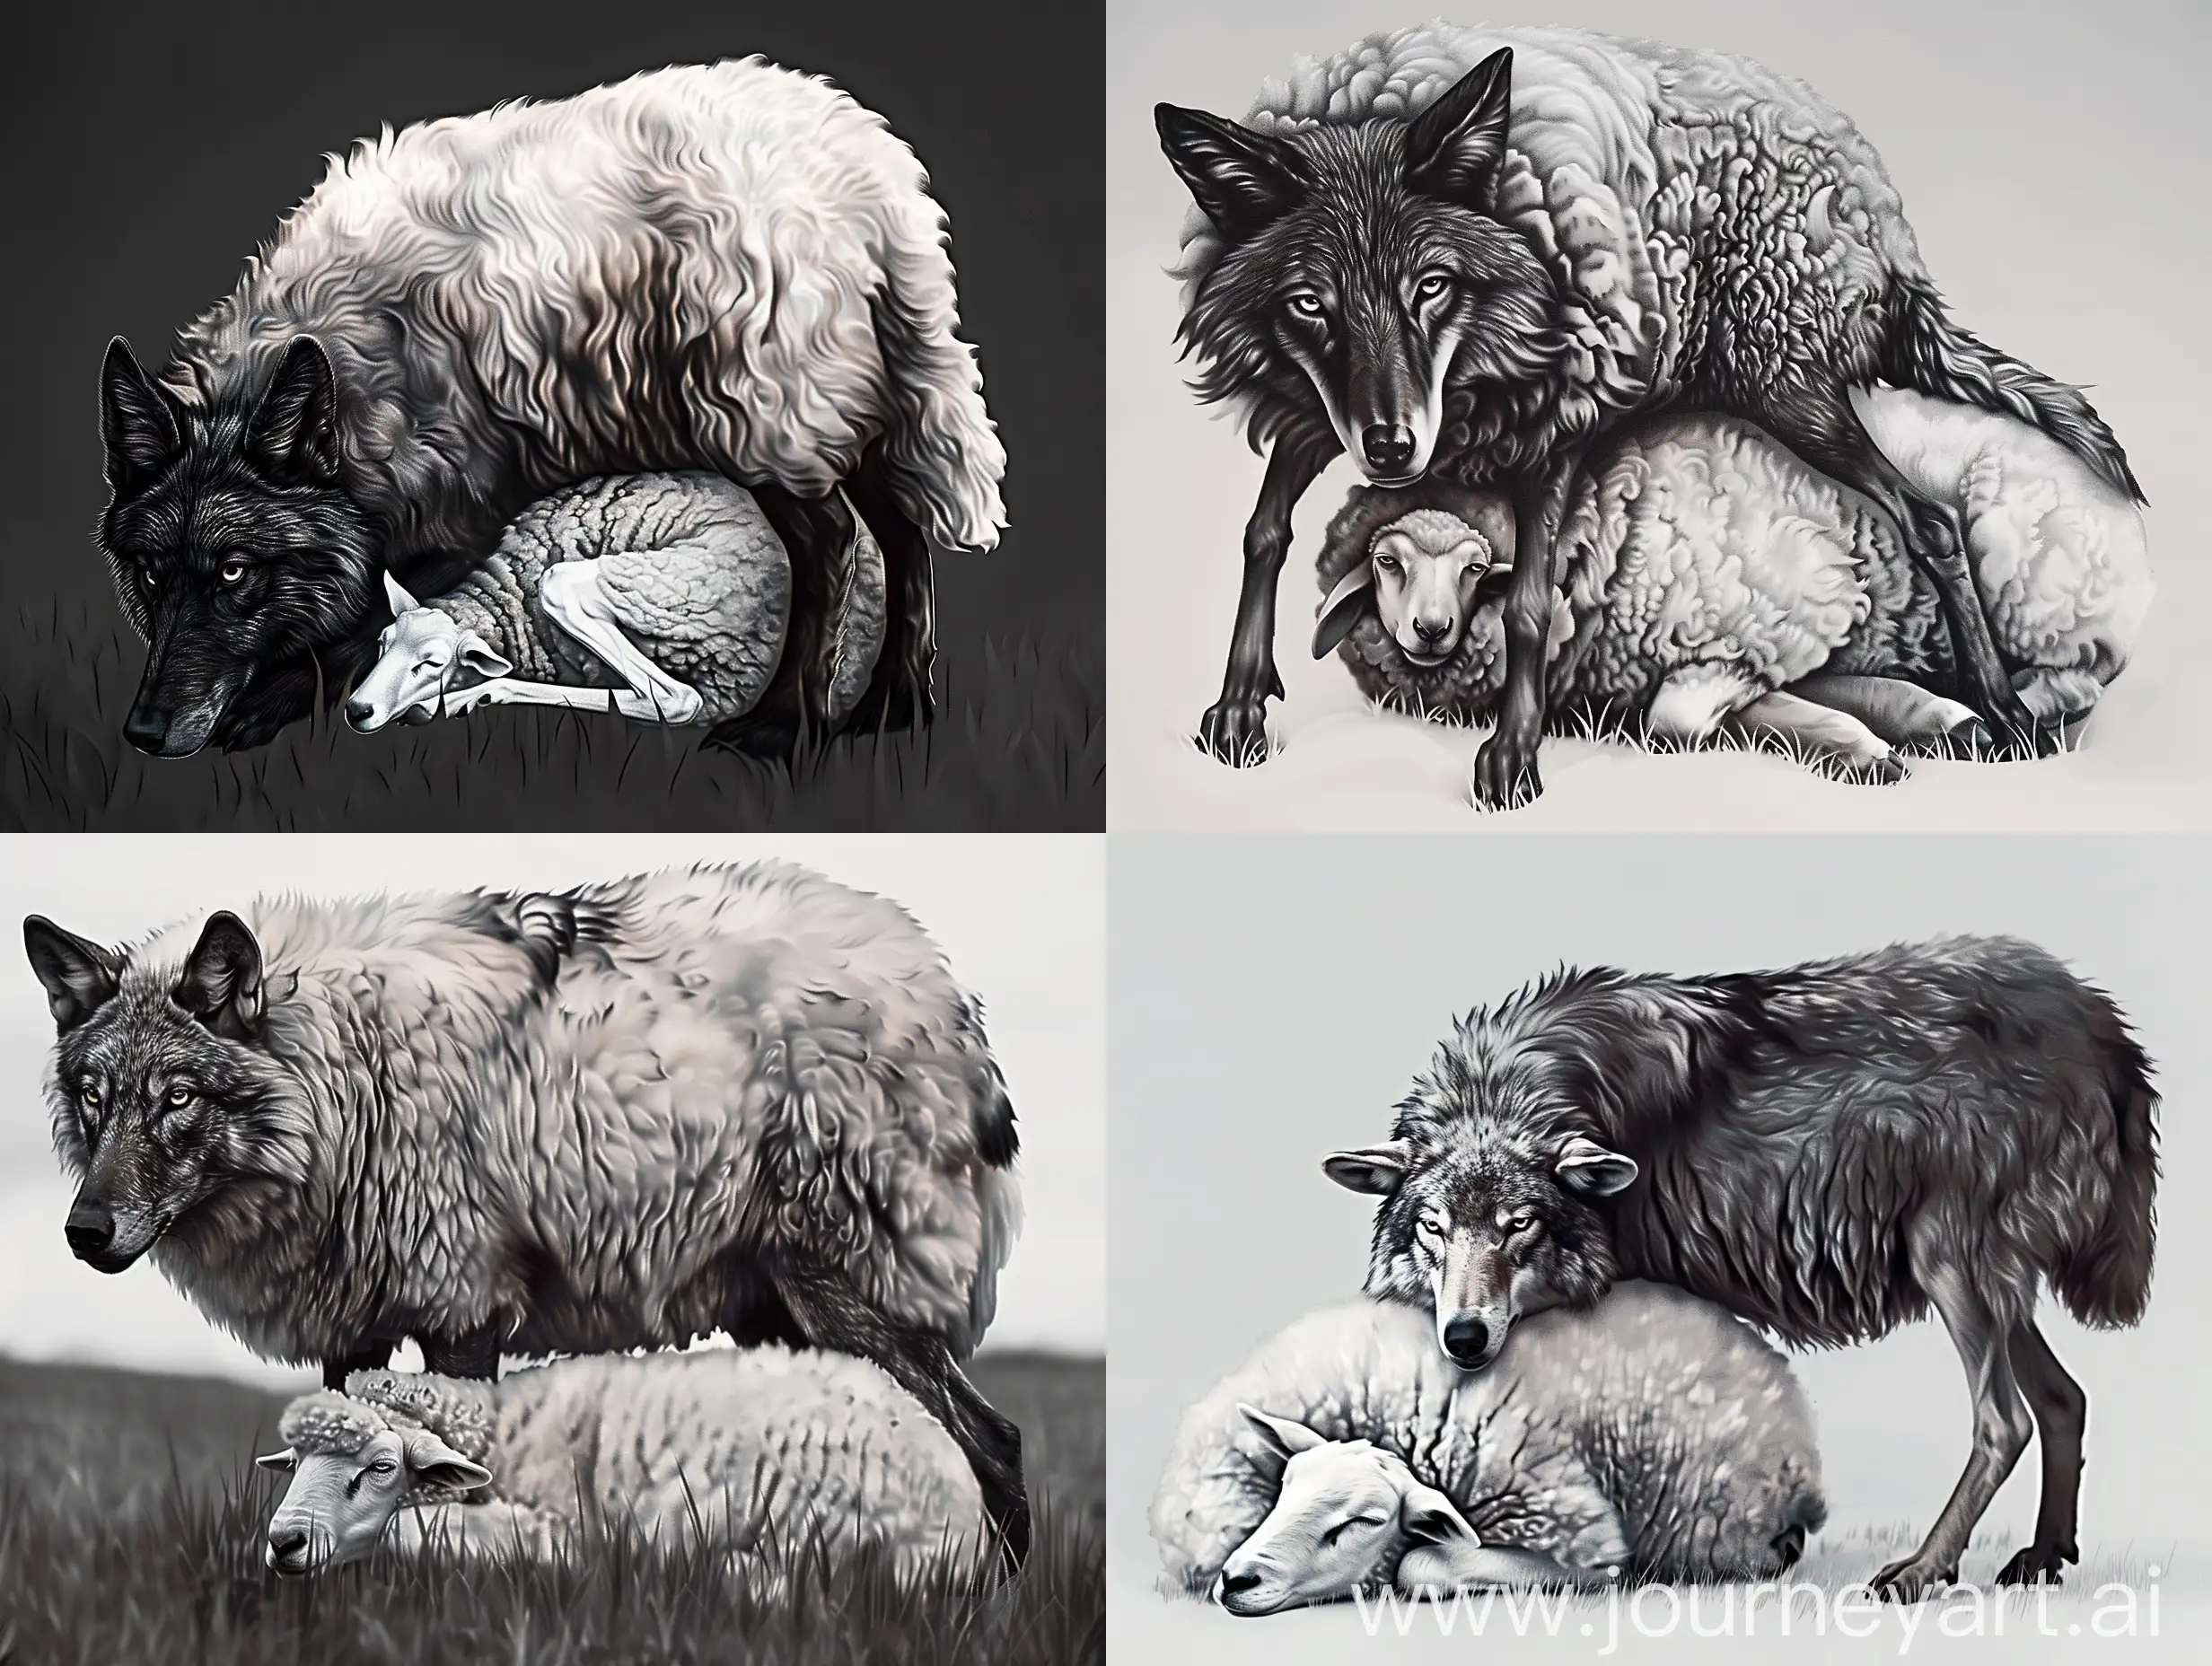 Minimalist-Black-and-White-Image-of-a-Wolf-with-a-Sleeping-Sheep